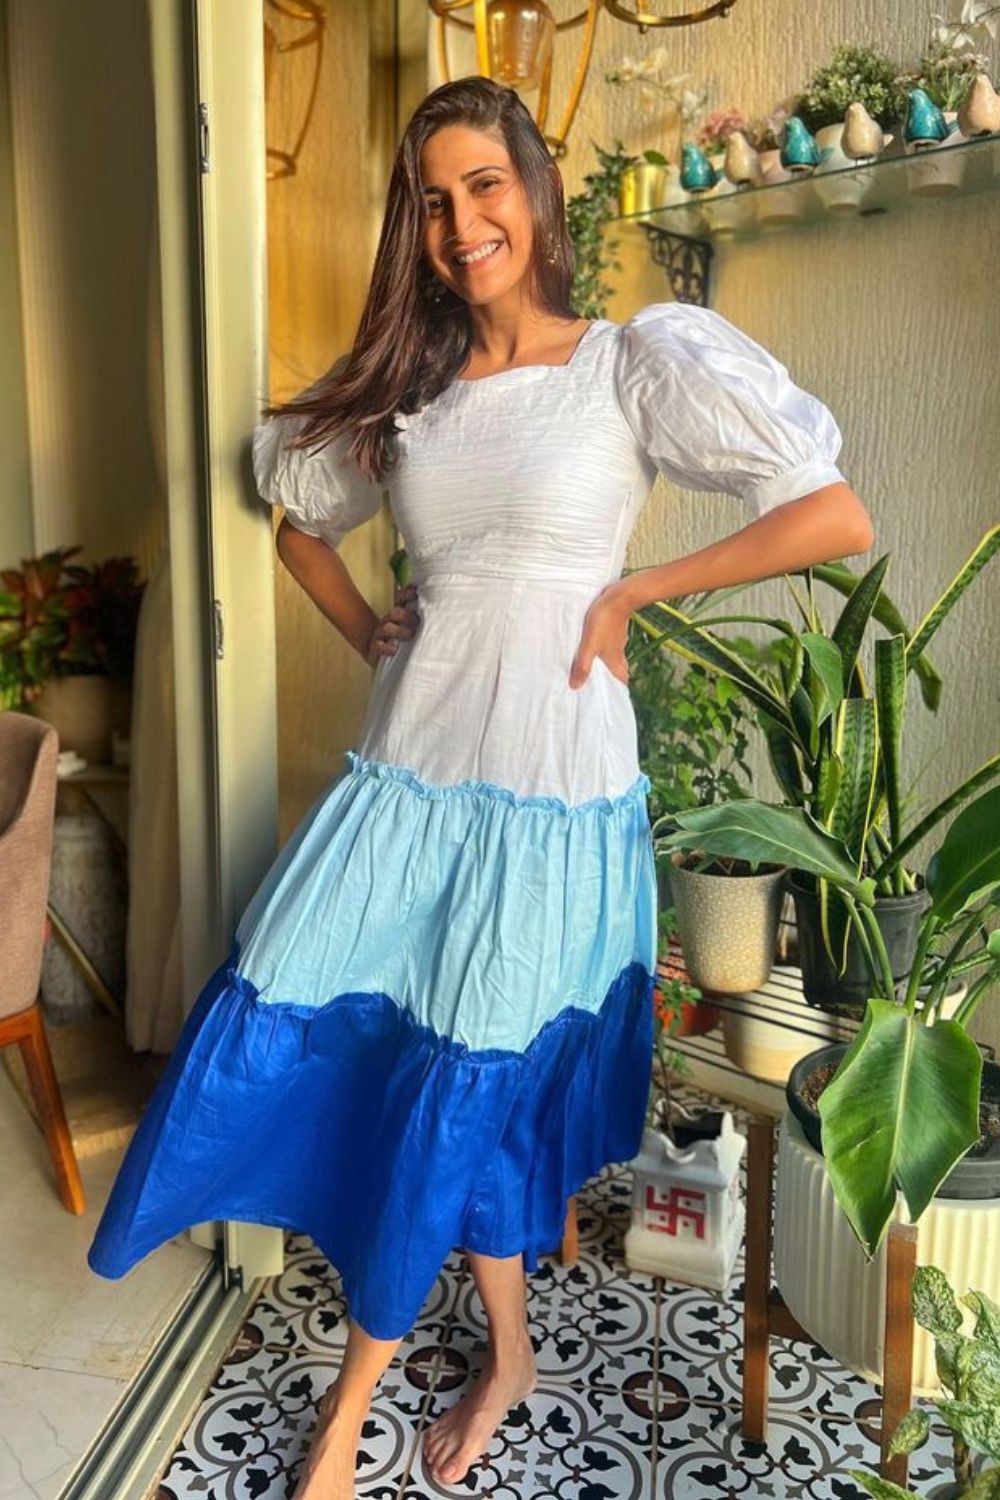 Aahana Kumra In Tiered Midi Dress In White, Powder Blue And Royal Blue